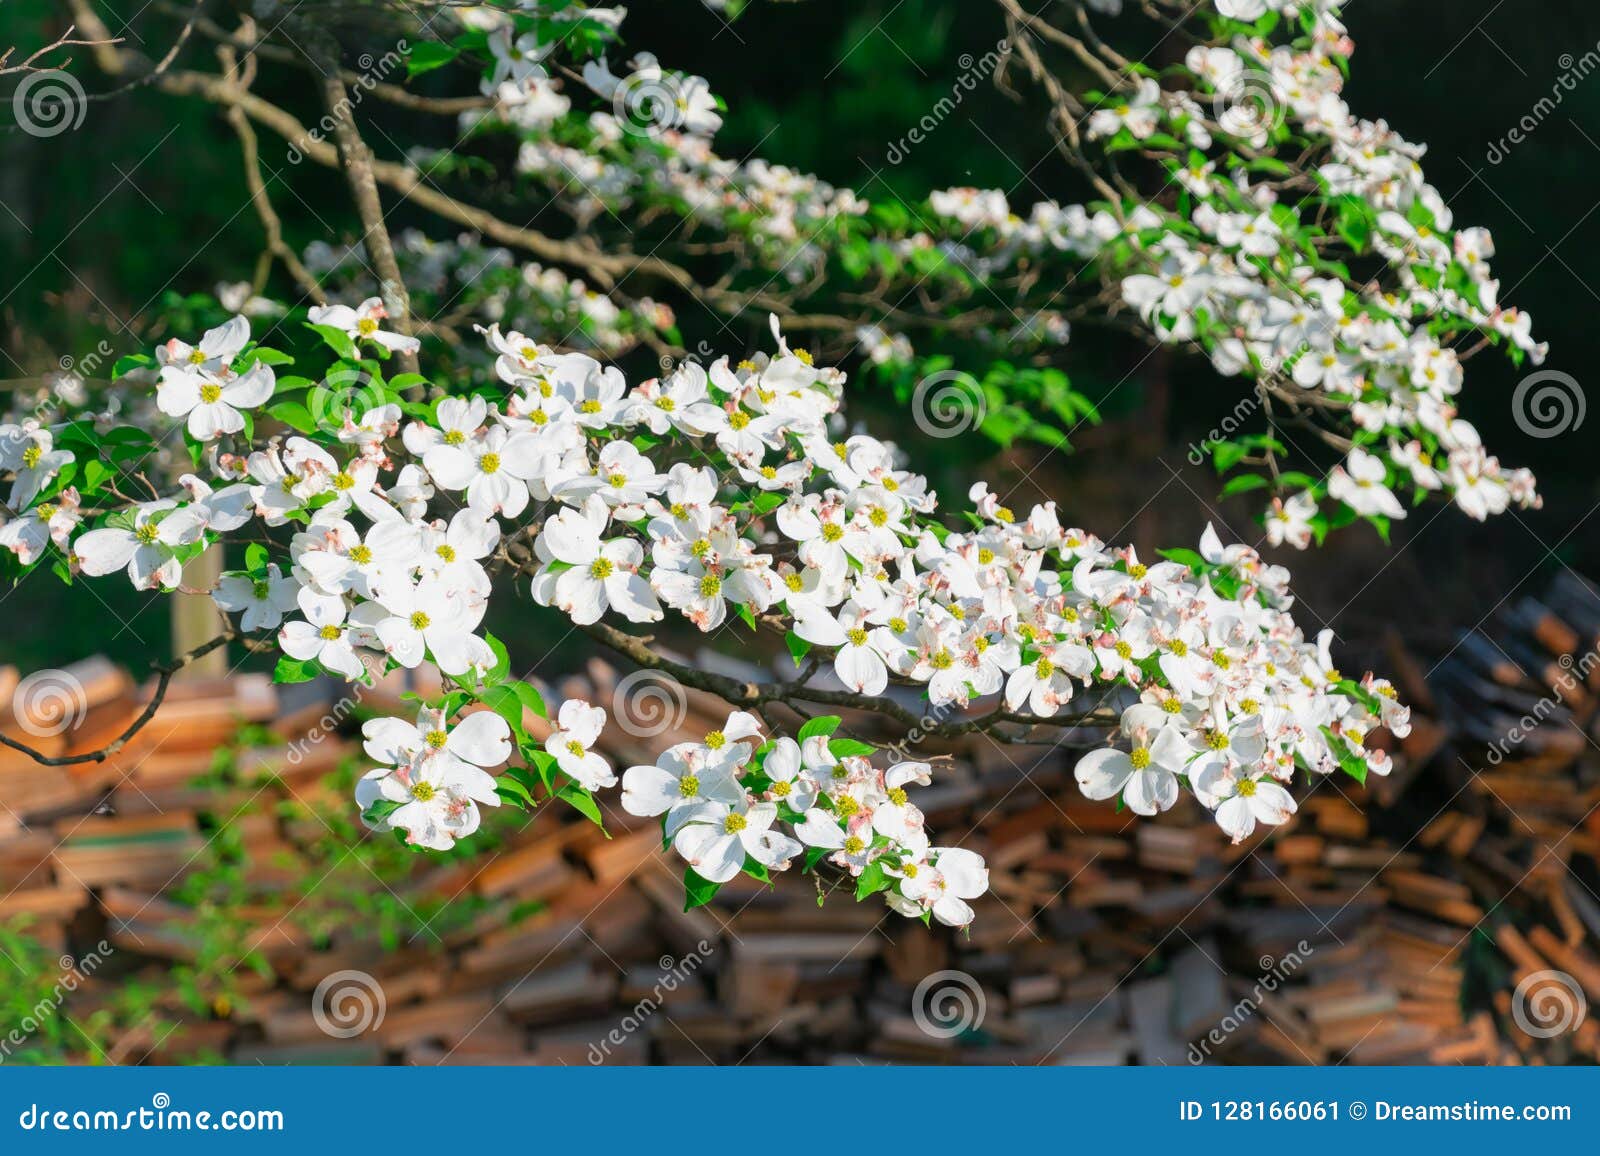 Flowering Dogwood Stock Image Image Of Green Outdoor 128166061